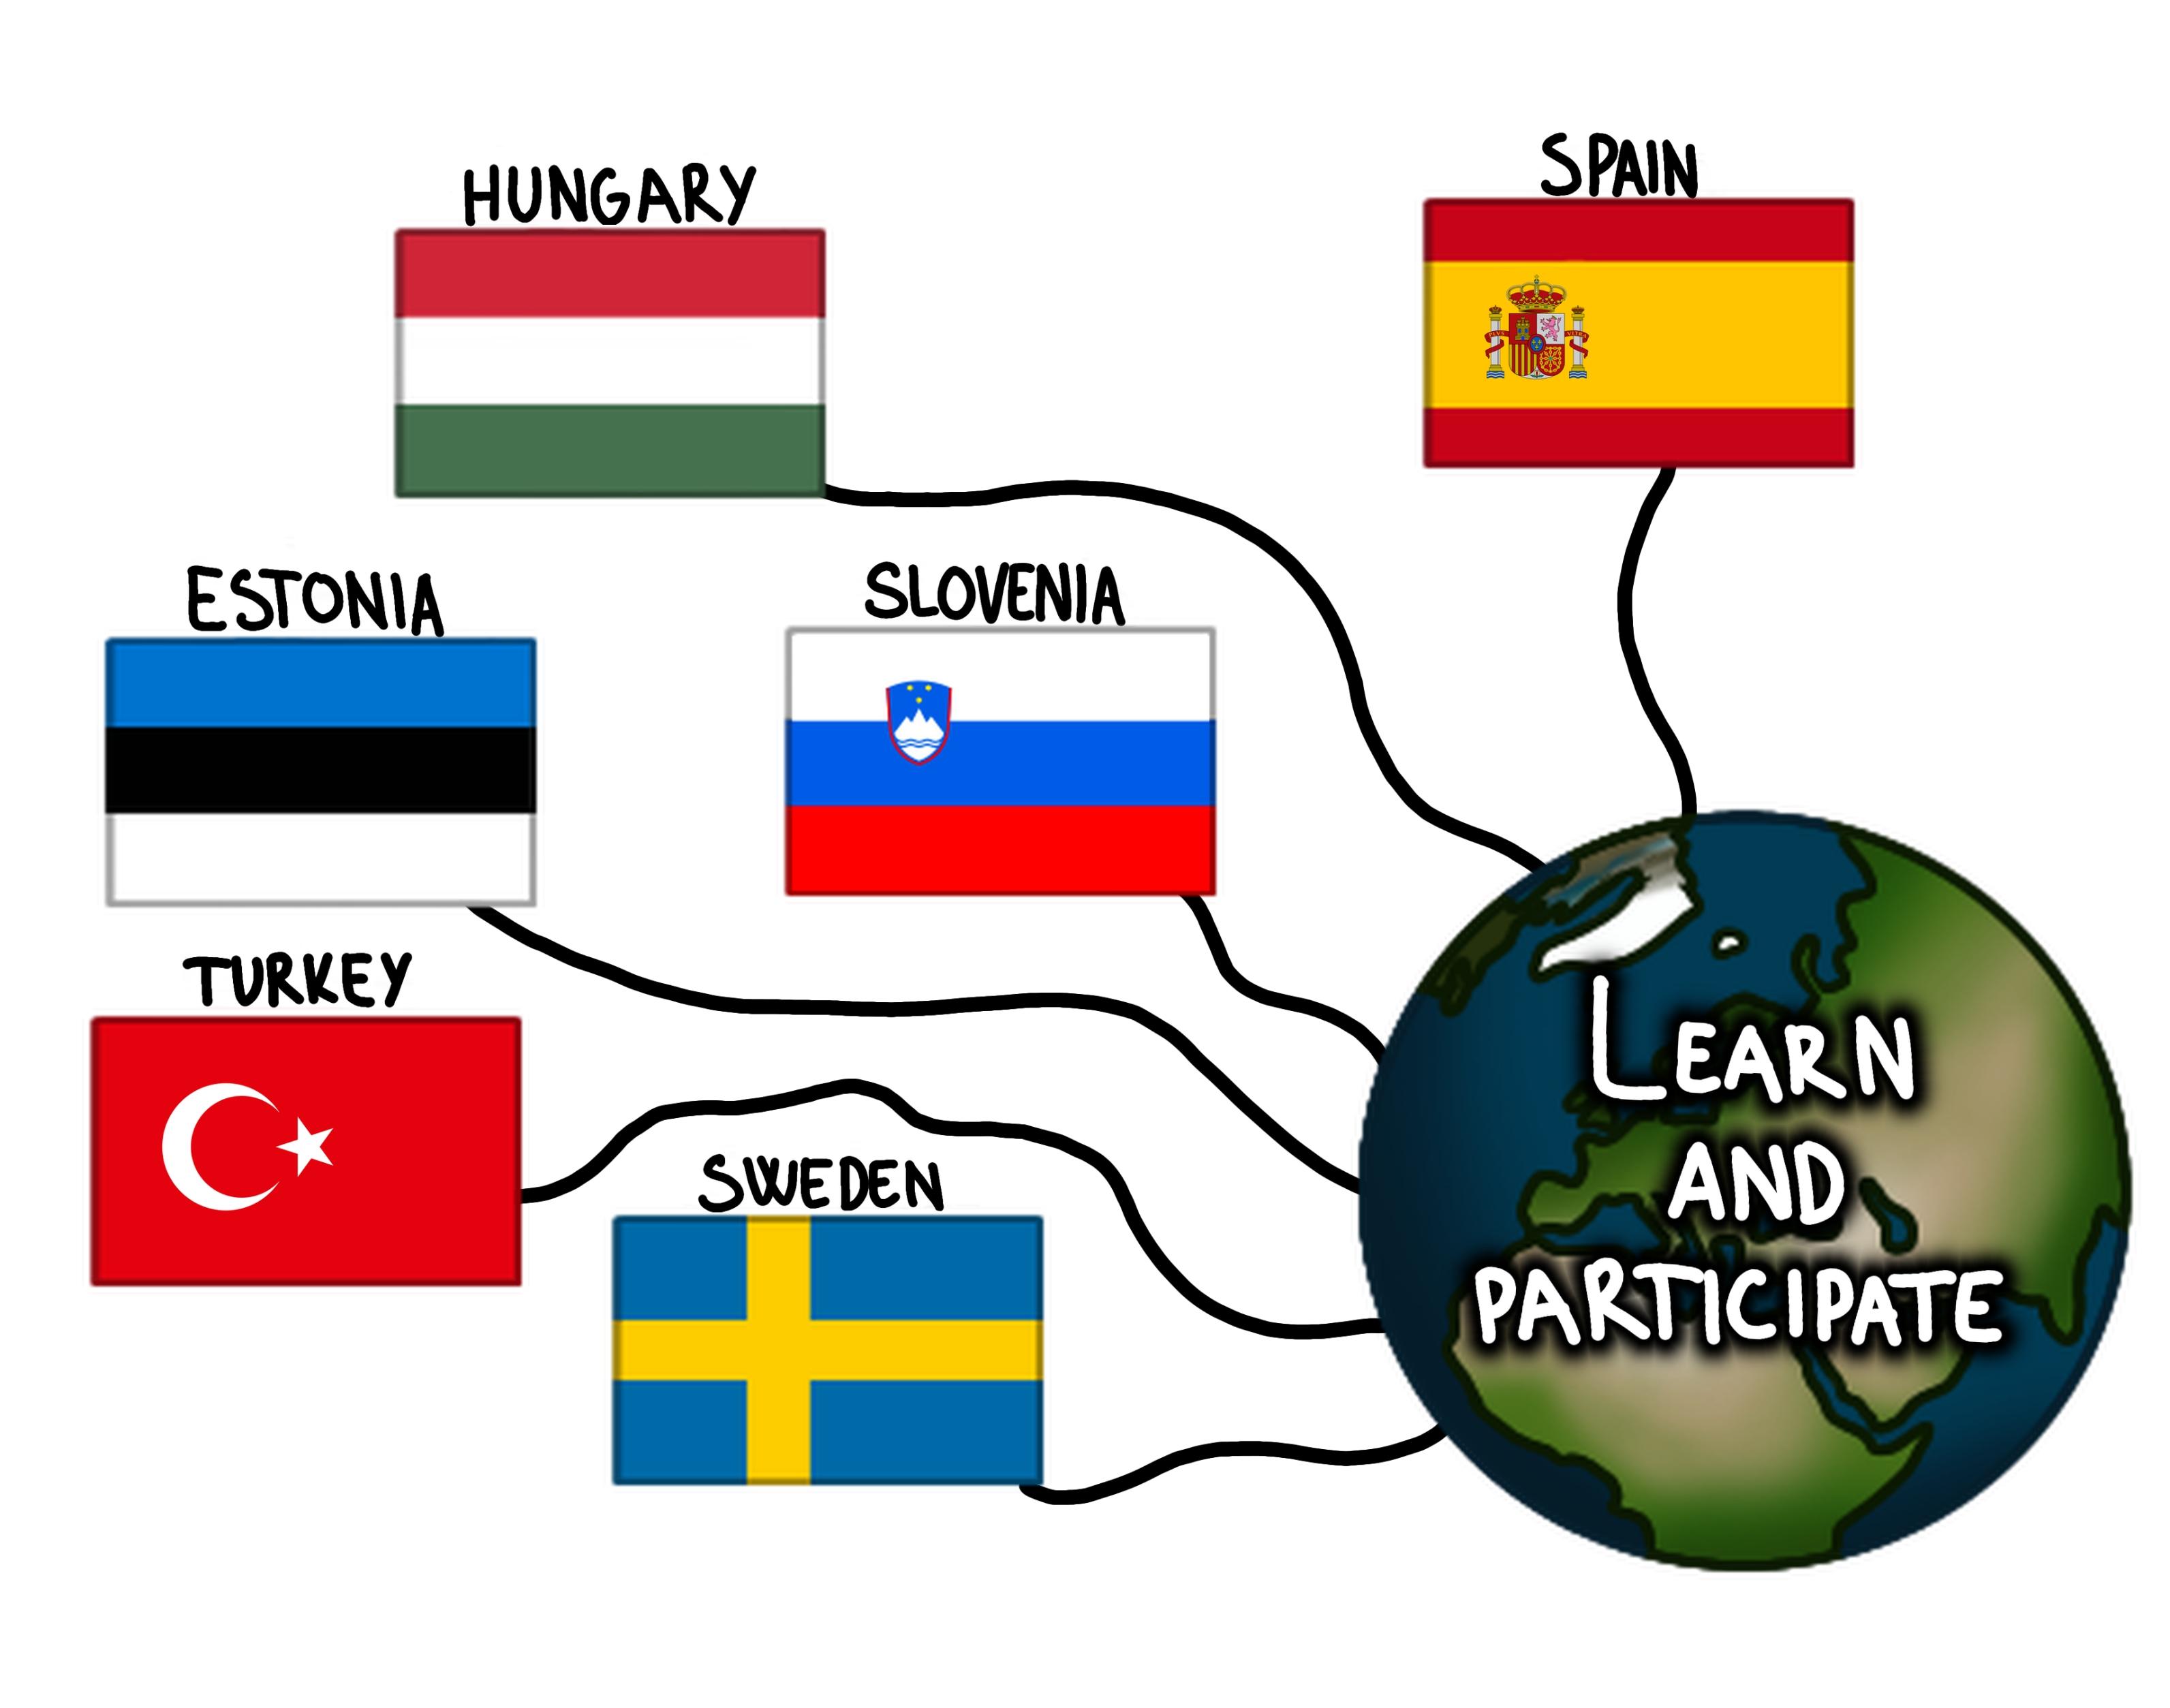 Learn and participate logo